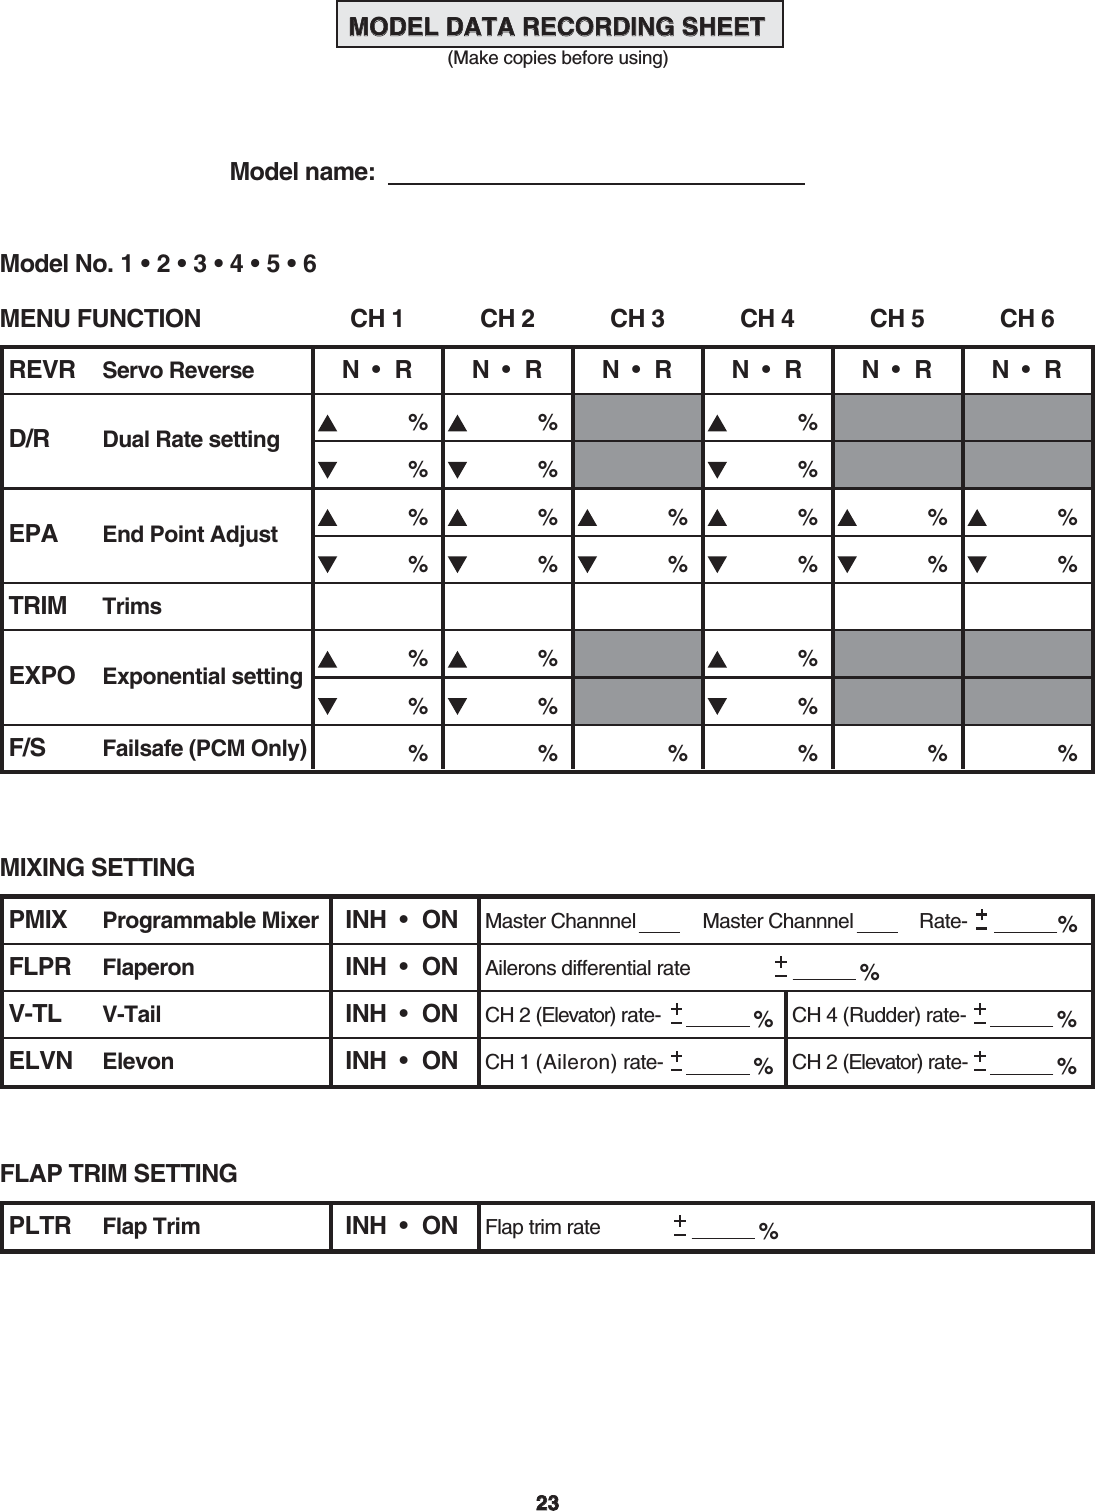 2323MODEL DATA RECORDING SHEET MODEL DATA RECORDING SHEET  (Make copies before using)  Model name: MENU FUNCTIONREVR Servo ReverseD/R Dual Rate settingEPA End Point AdjustTRIM TrimsEXPO Exponential settingF/S Failsafe (PCM Only)CH 1 CH 2 CH 3 CH 4 CH 5 CH 6N  •  RModel No. 1 • 2 • 3 • 4 • 5 • 6%% % %N  •  R%N  •  RN  •  R%%% % %% %N  •  RN  •  R%%%%%%%%%%%%%%%%%%MIXING SETTINGPMIX Programmable MixerFlaperonV-TailElevonINH  •  ONFLPR INH  •  ONV-TL INH  •  ONELVN INH  •  ONMaster ChannnelAilerons differential rate %Master Channnel Rate- %CH 2 (Elevator) rate- %CH 4 (Rudder) rate- %CH 1 (Aileron) rate- %CH 2 (Elevator) rate- %FLAP TRIM SETTINGPLTR Flap Trim INH  •  ON Flap trim rate %